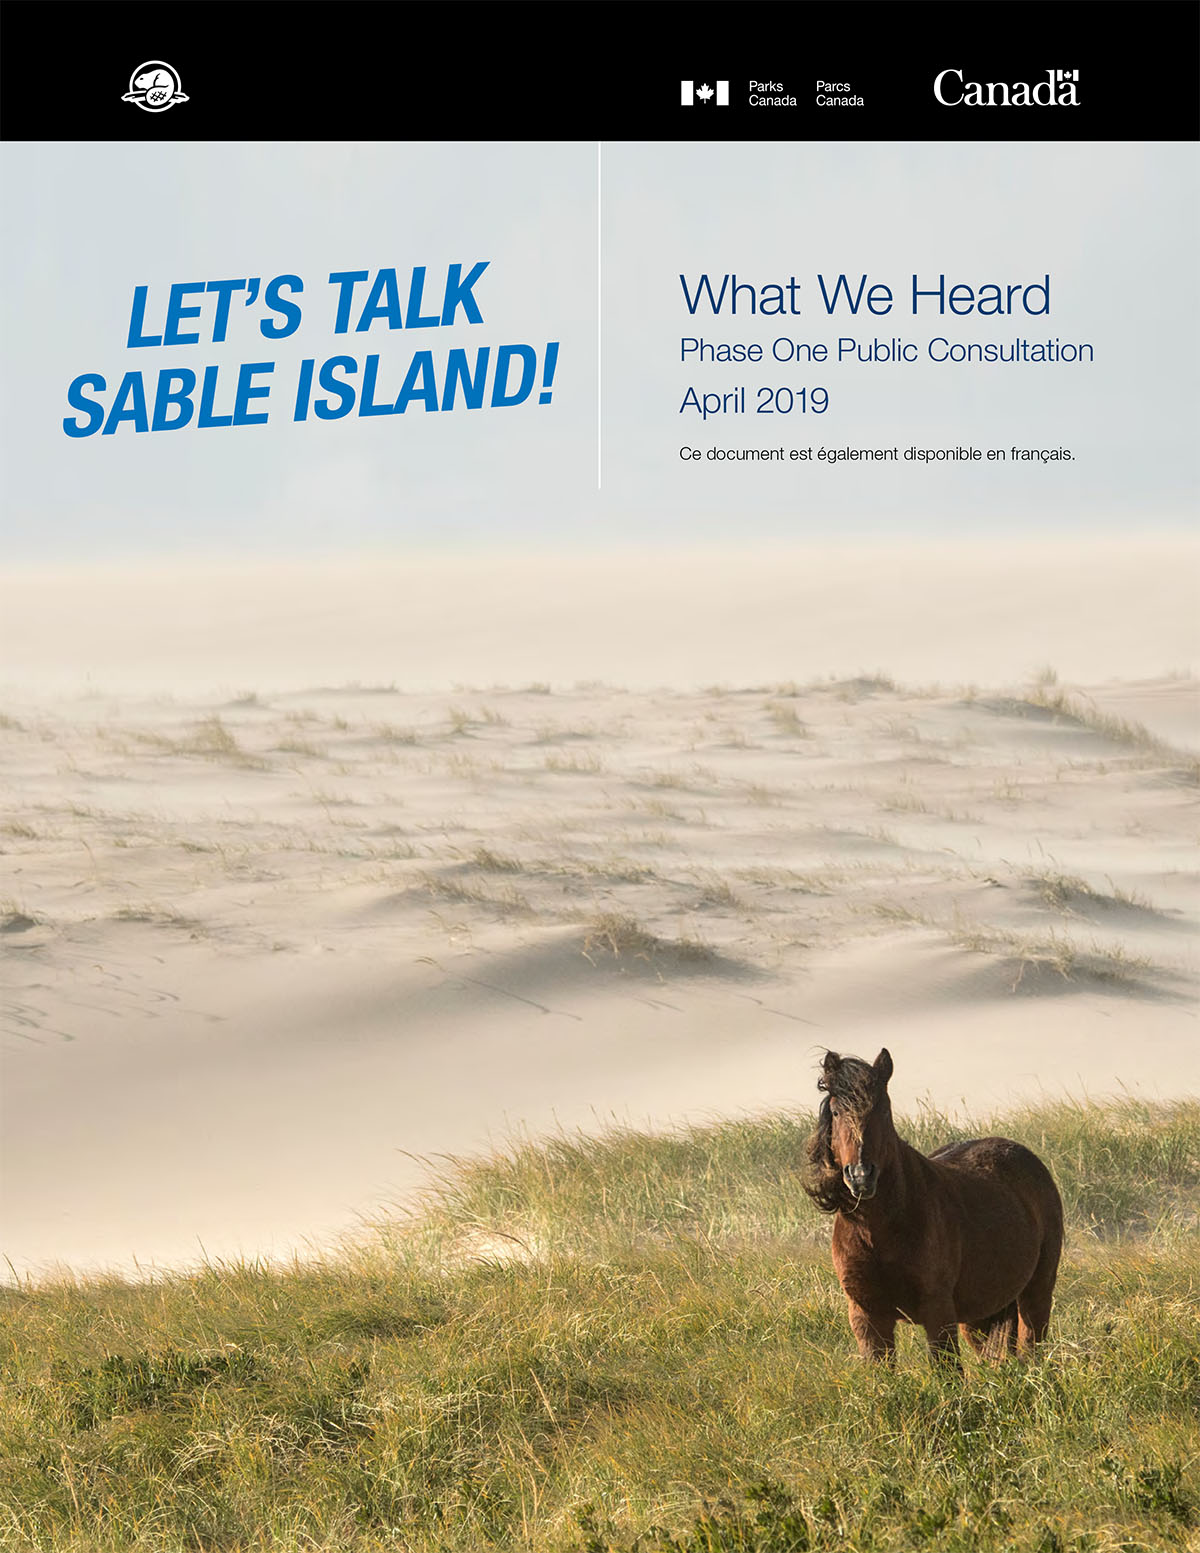 A horse on a beach. Text: Lets Talk Sable Island! What We Heard Phase One Public Consultation April 2019